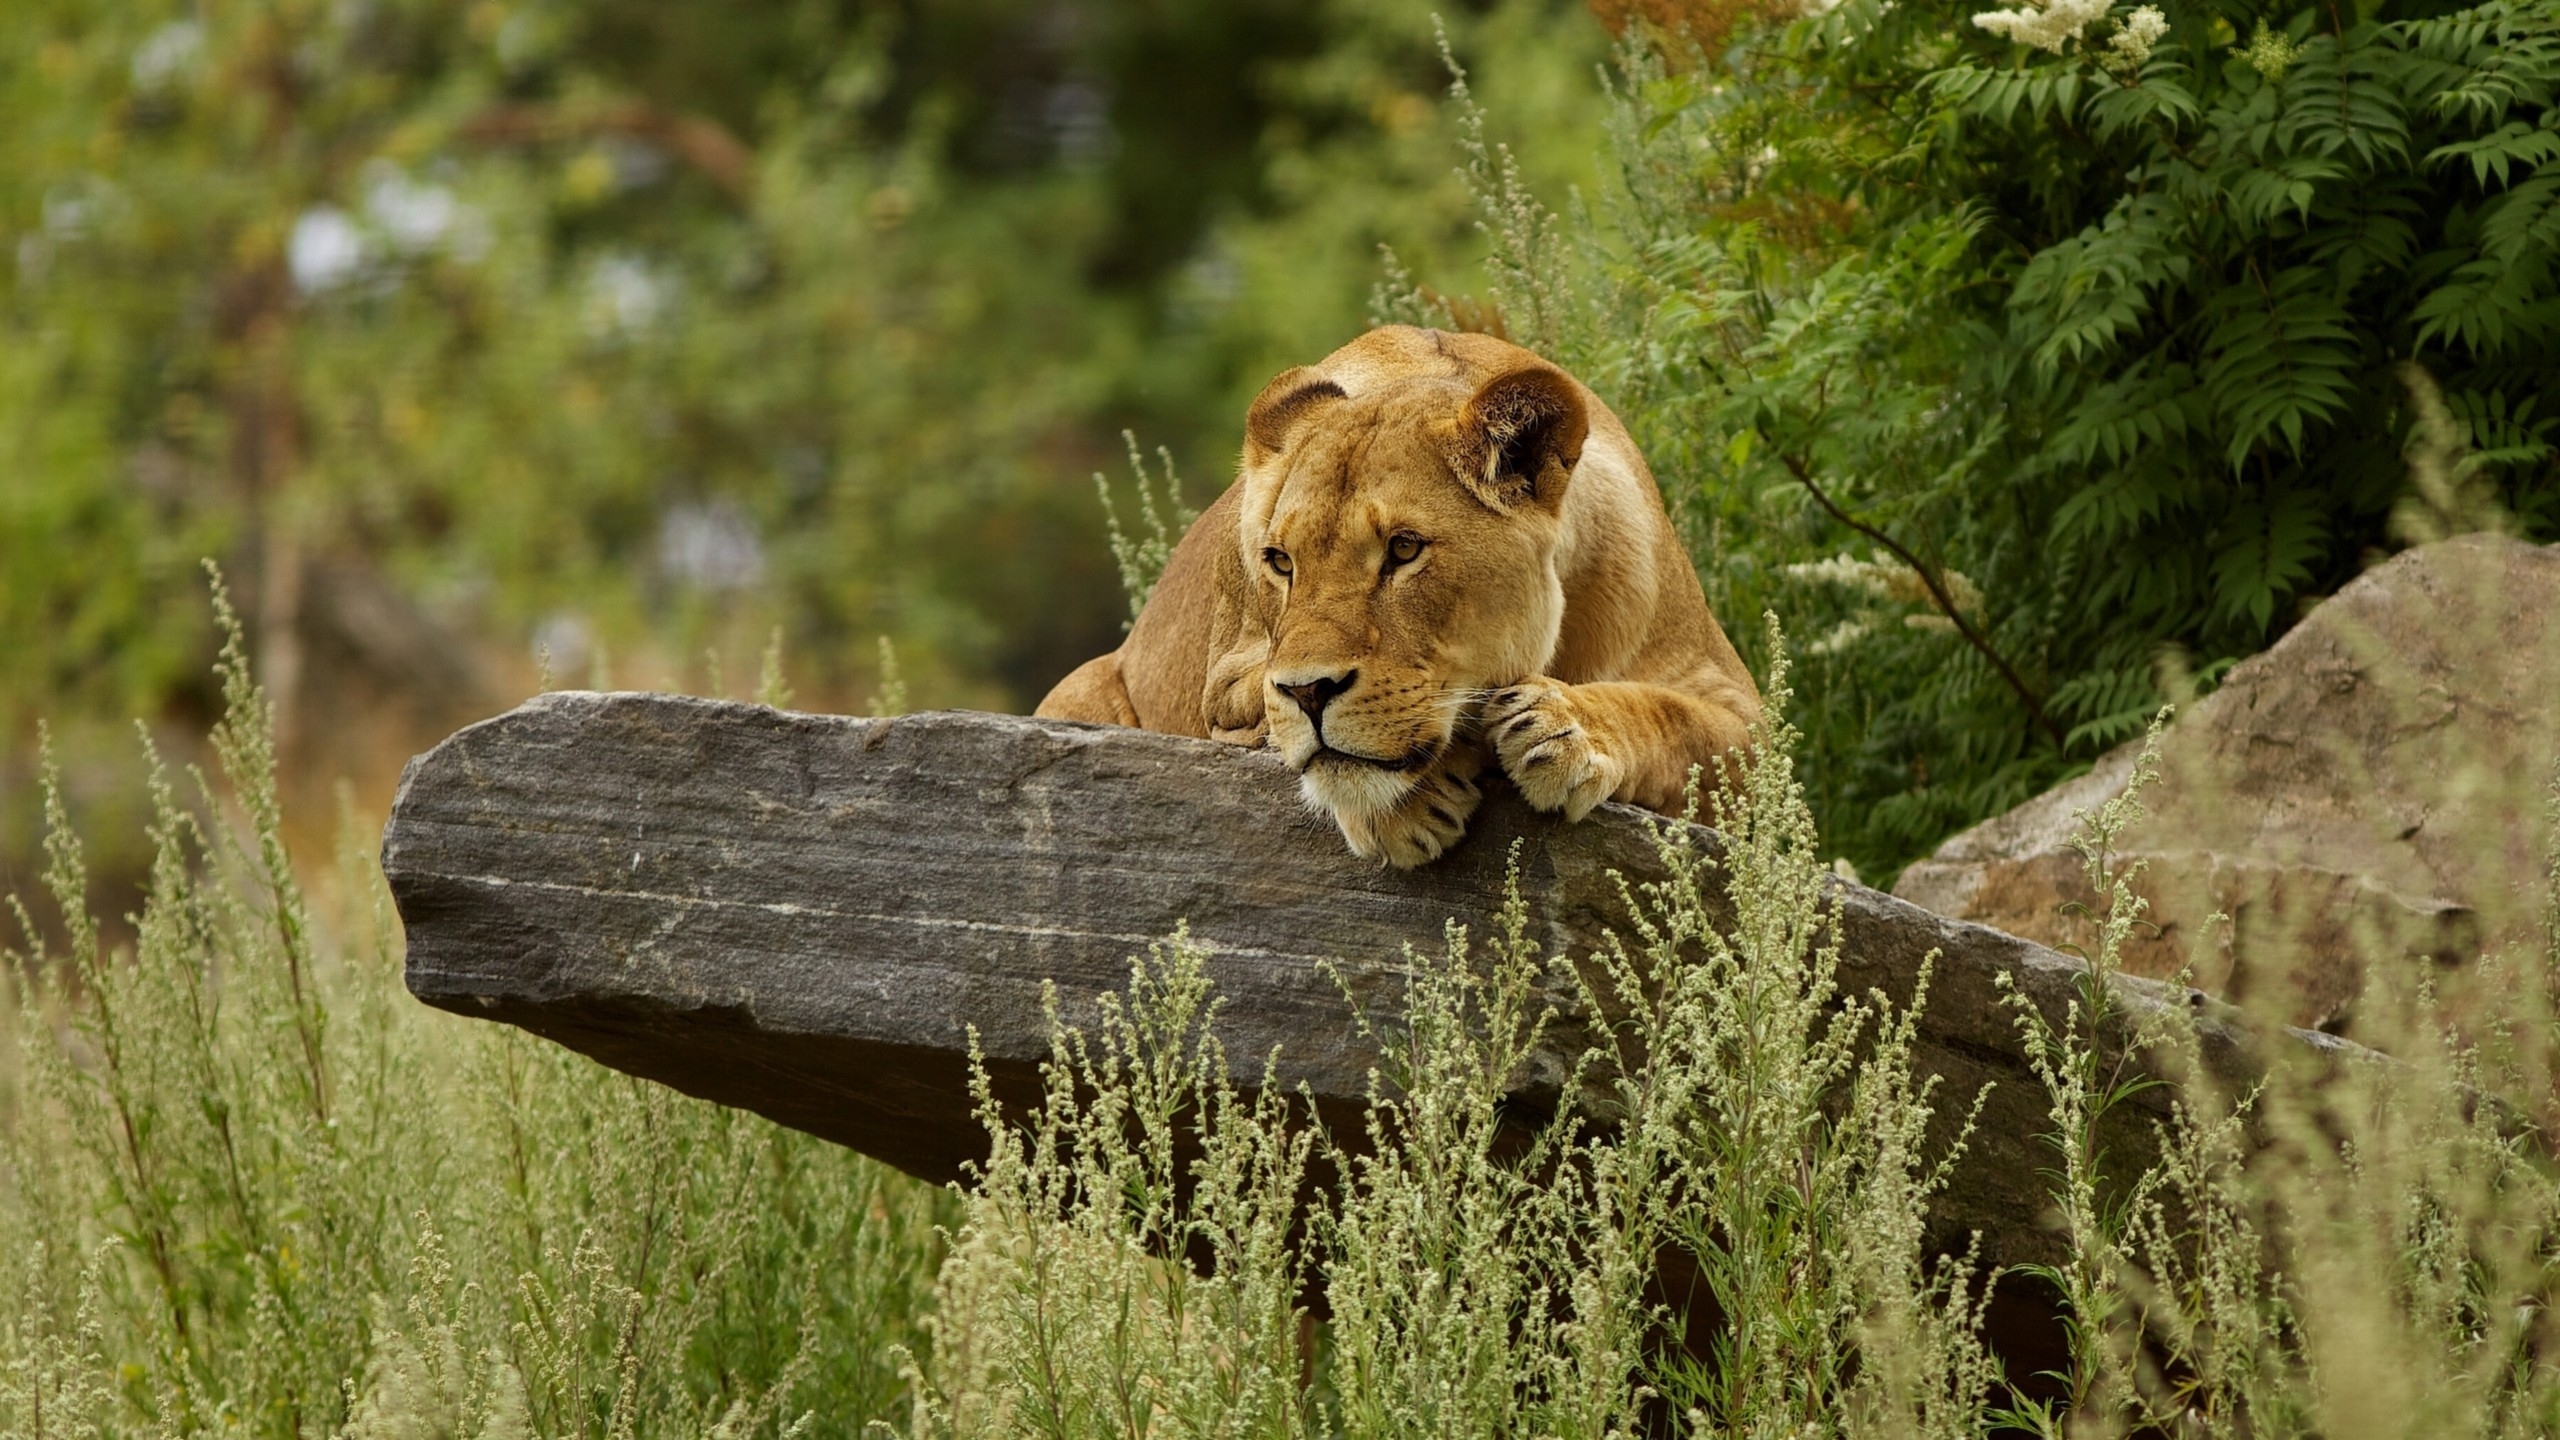 Cute Lion Relaxing for 2560x1440 HDTV resolution